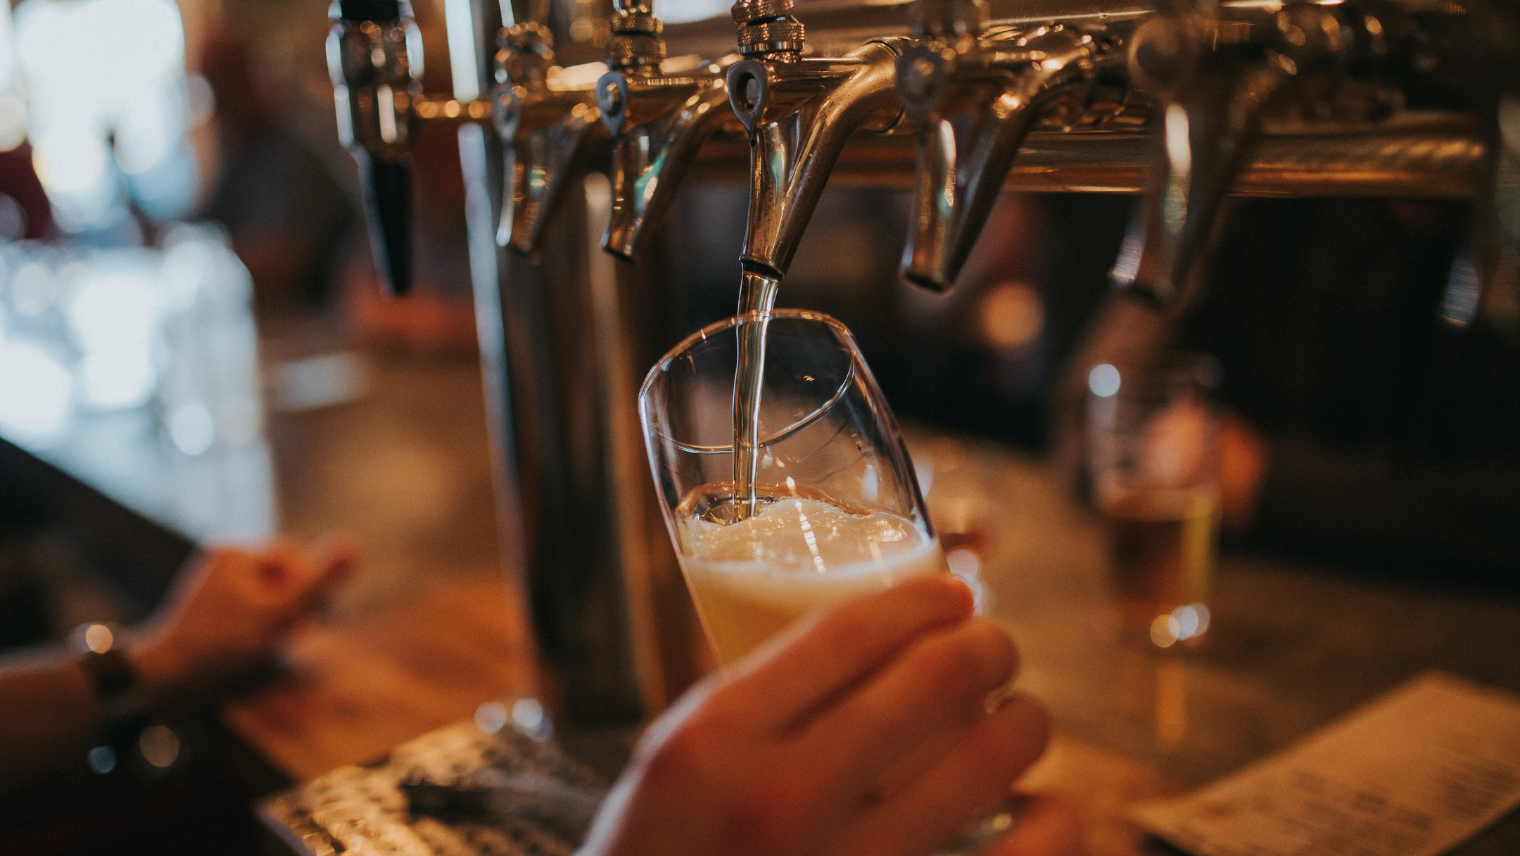 Image of a person pouring a pint at a pub